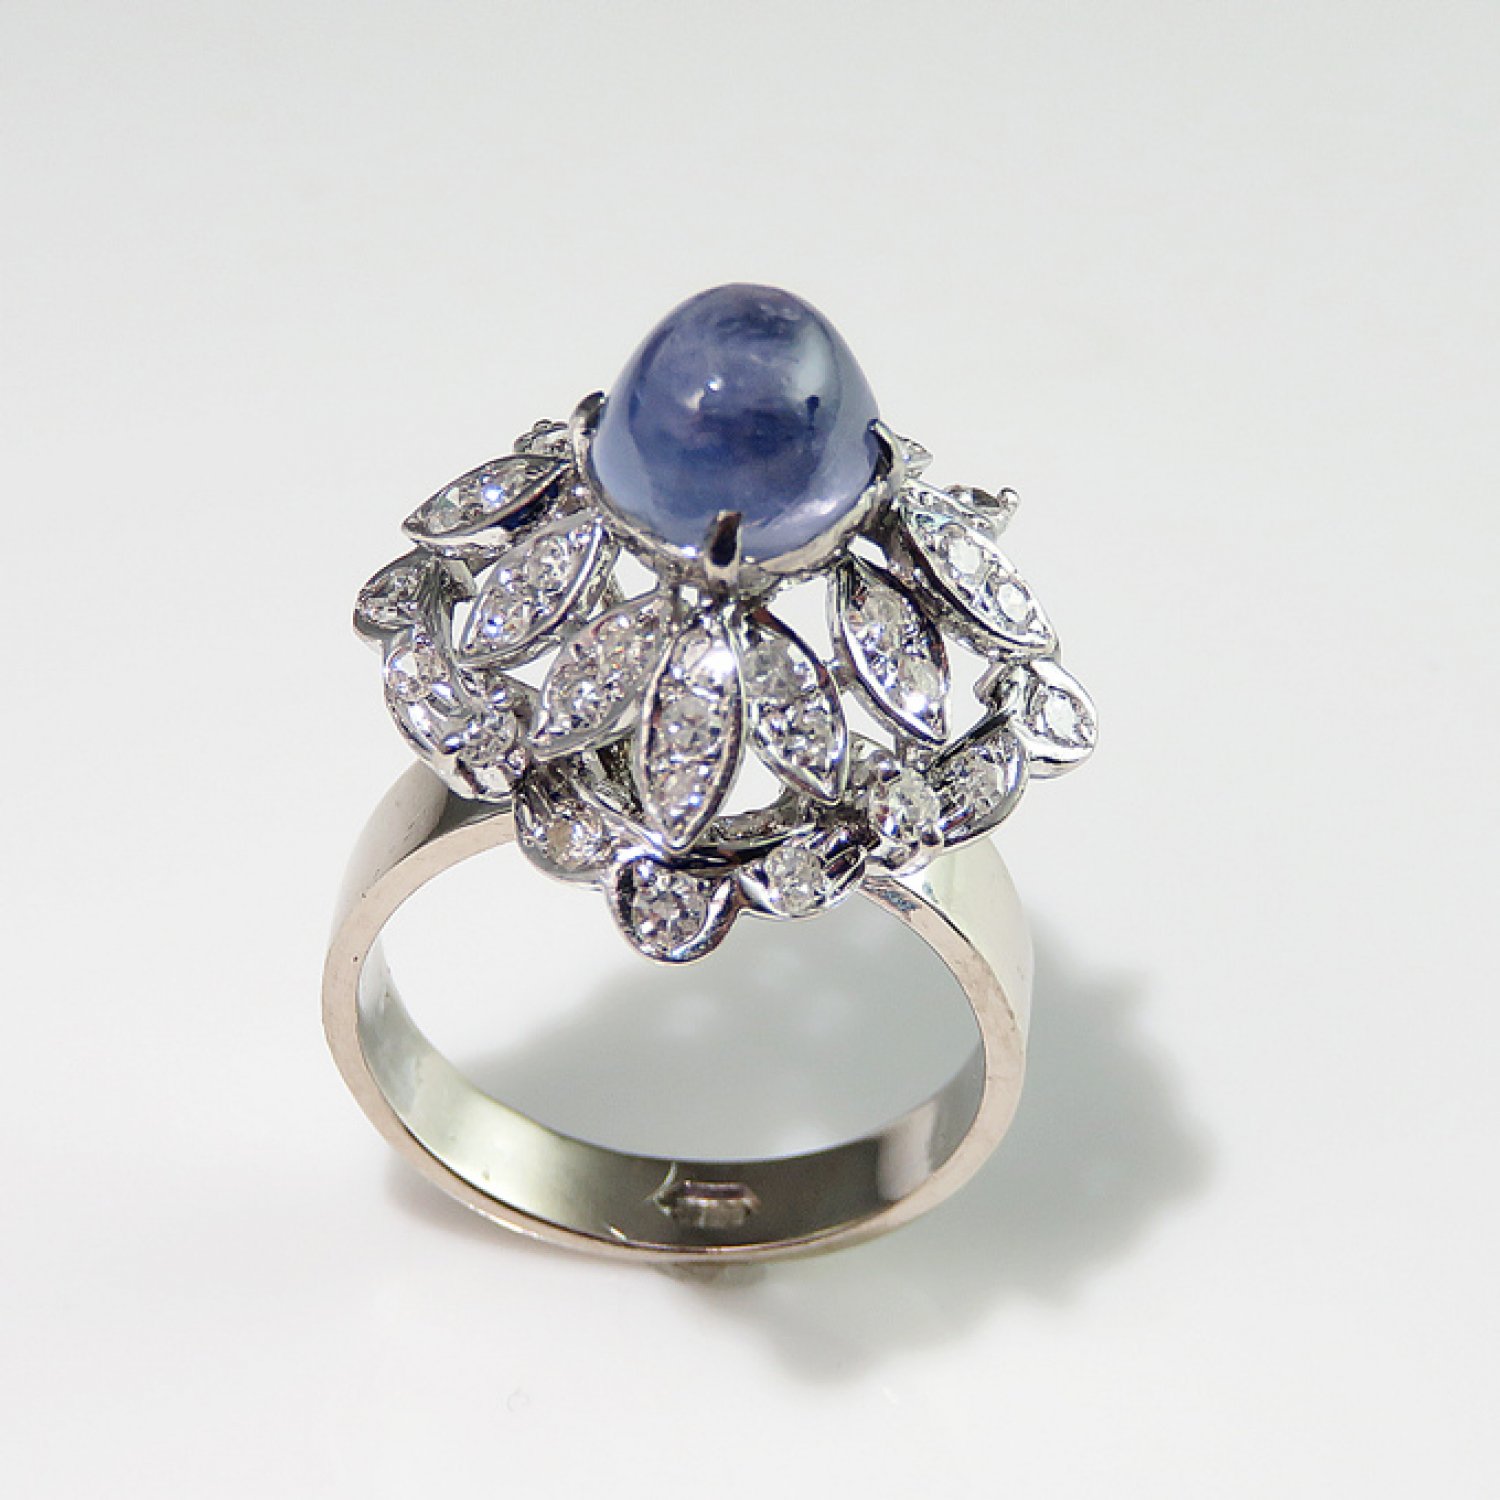 Art Deco Cabochon Sapphire Diamond Ring Engagement Ring Wedding Ring Band 18K Gold Handmade 1920s 1930s 1940s Cocktail Bombe Pyramid Statement Pretty Unique One of a Kind Vintage Fine Star Sapphire Natural Sapphire Blue Sapphire Designer Color